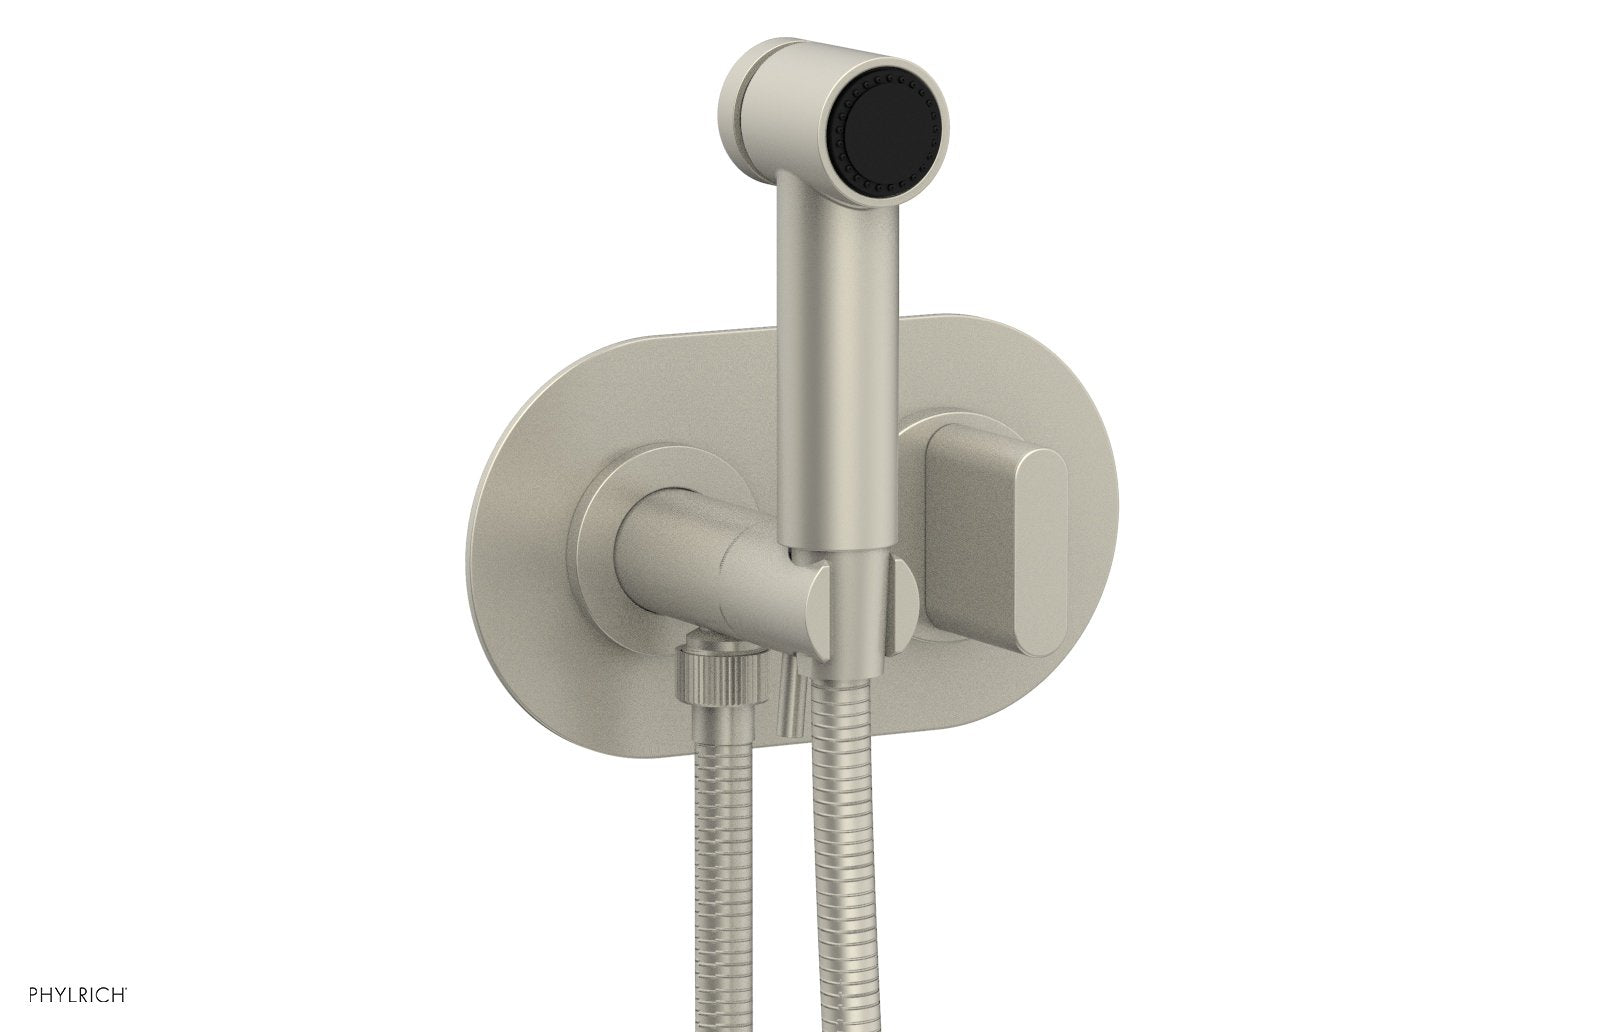 Phylrich ROND Wall Mounted Bidet, Blade Handle